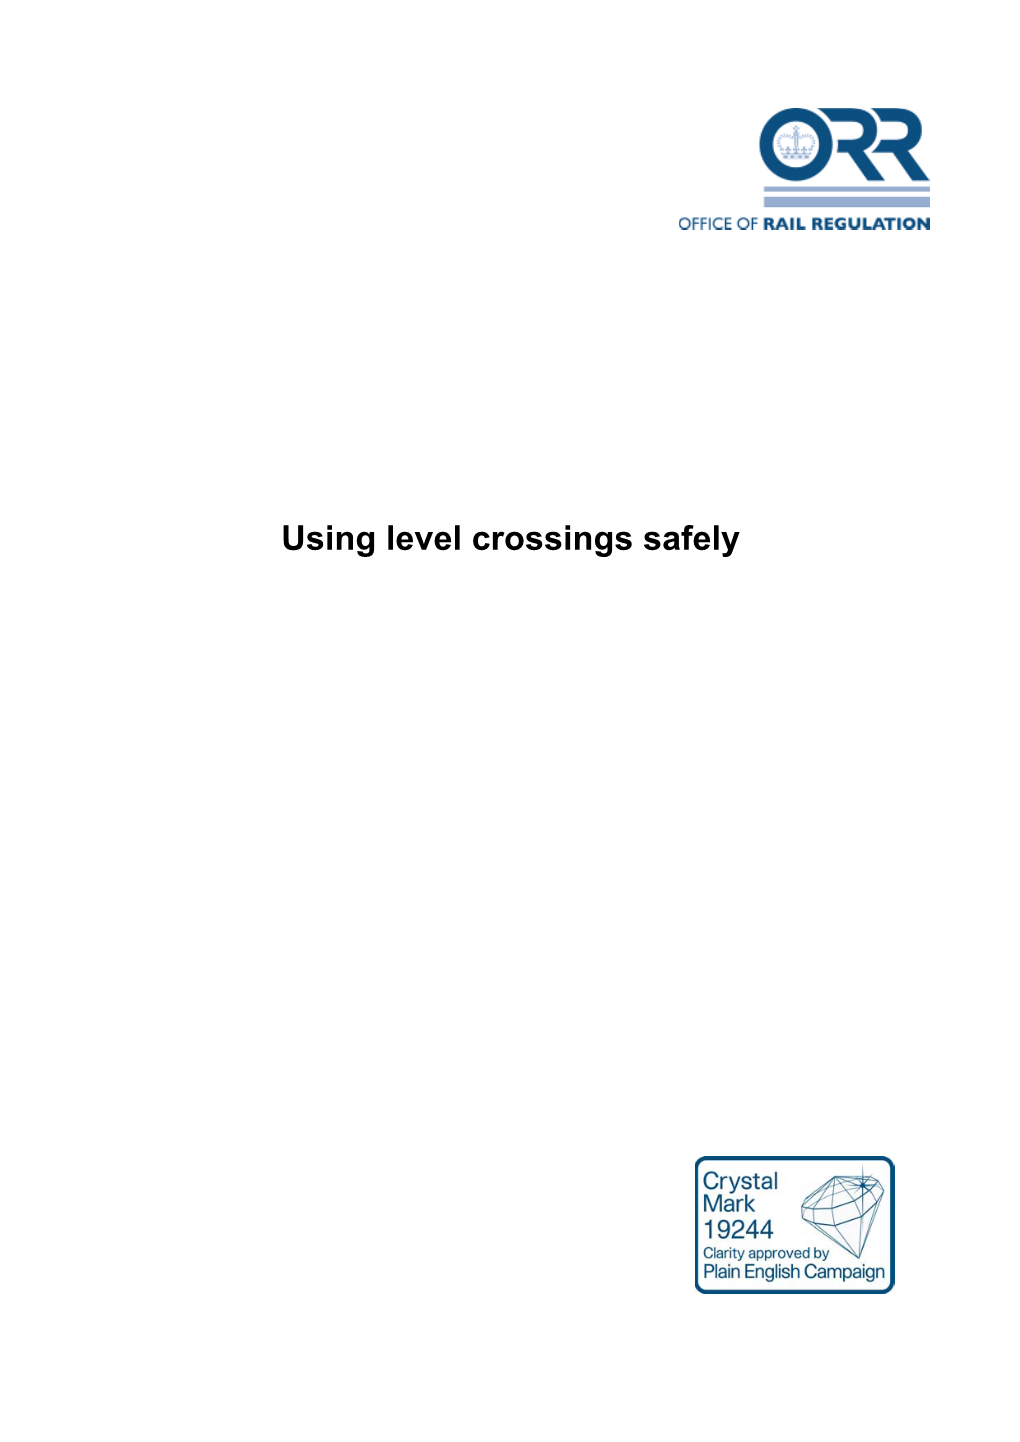 Using Level Crossings Safely